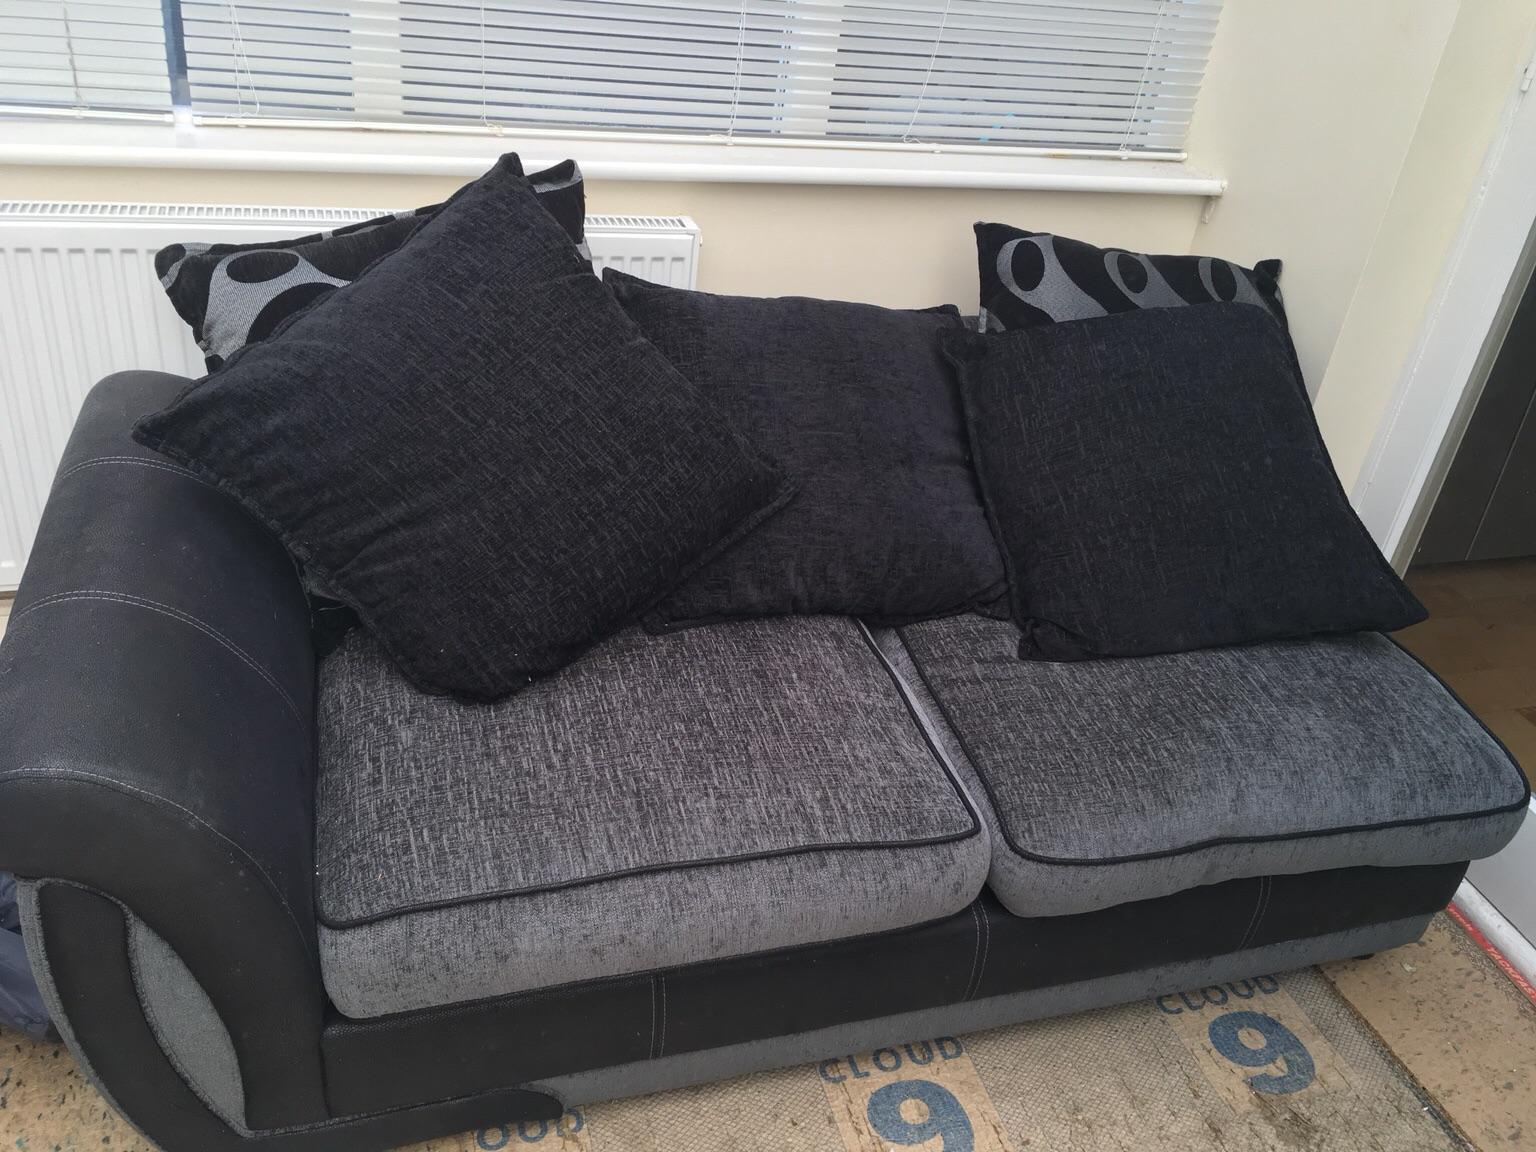 Dfs Left Hand Shannon Corner Sofa 300 In Nw1 London For 300 00 For Sale Shpock